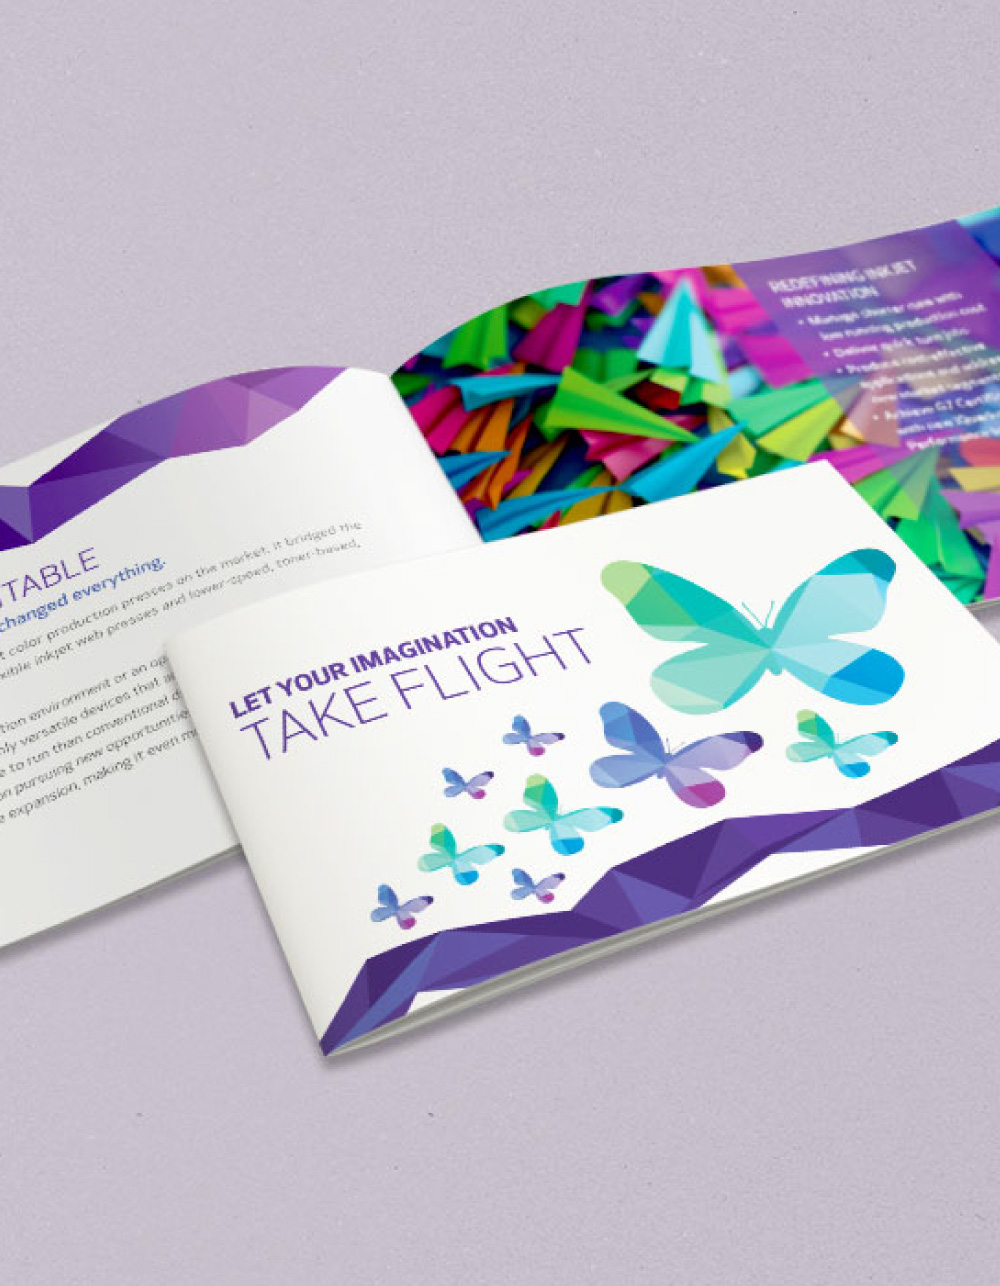 two pamphlets sitting on purple background, one closed and one open